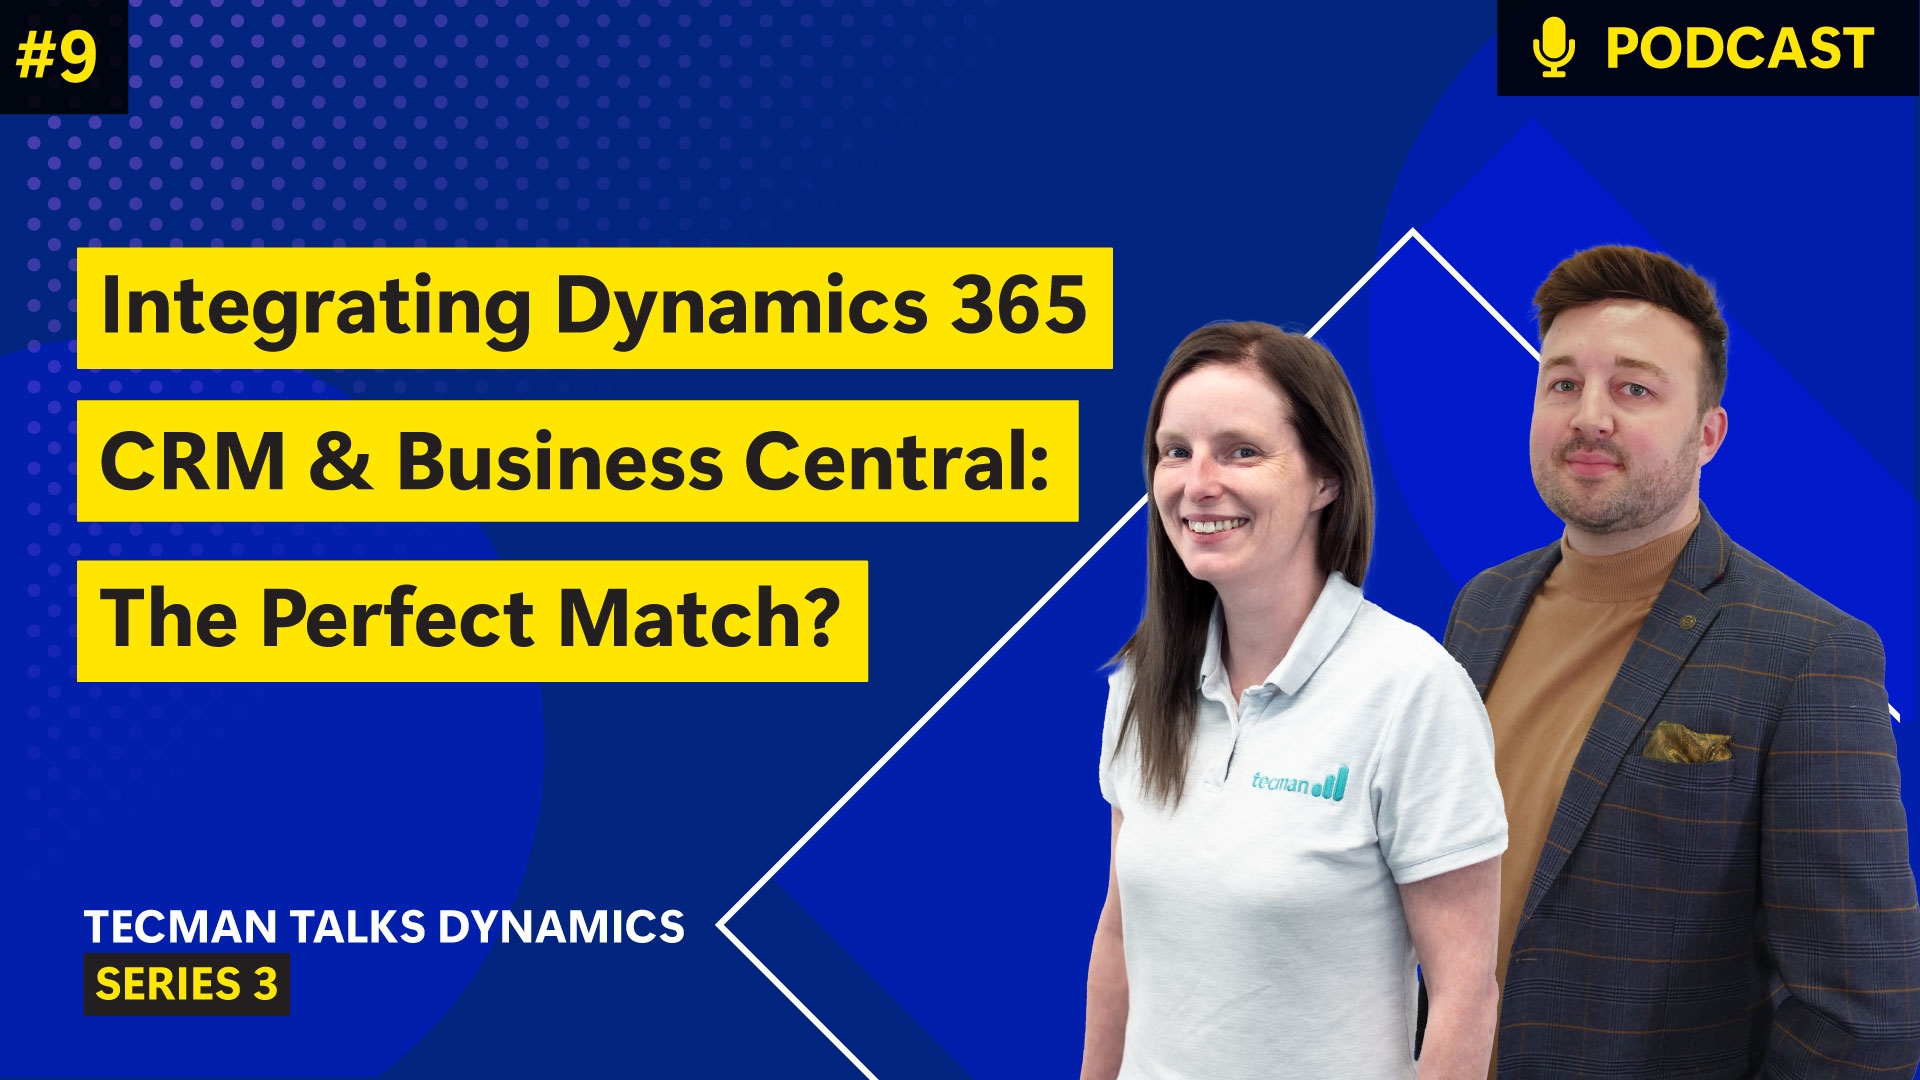 Integrating Microsoft Dynamics 365 CRM & Business Central: The Perfect Match?